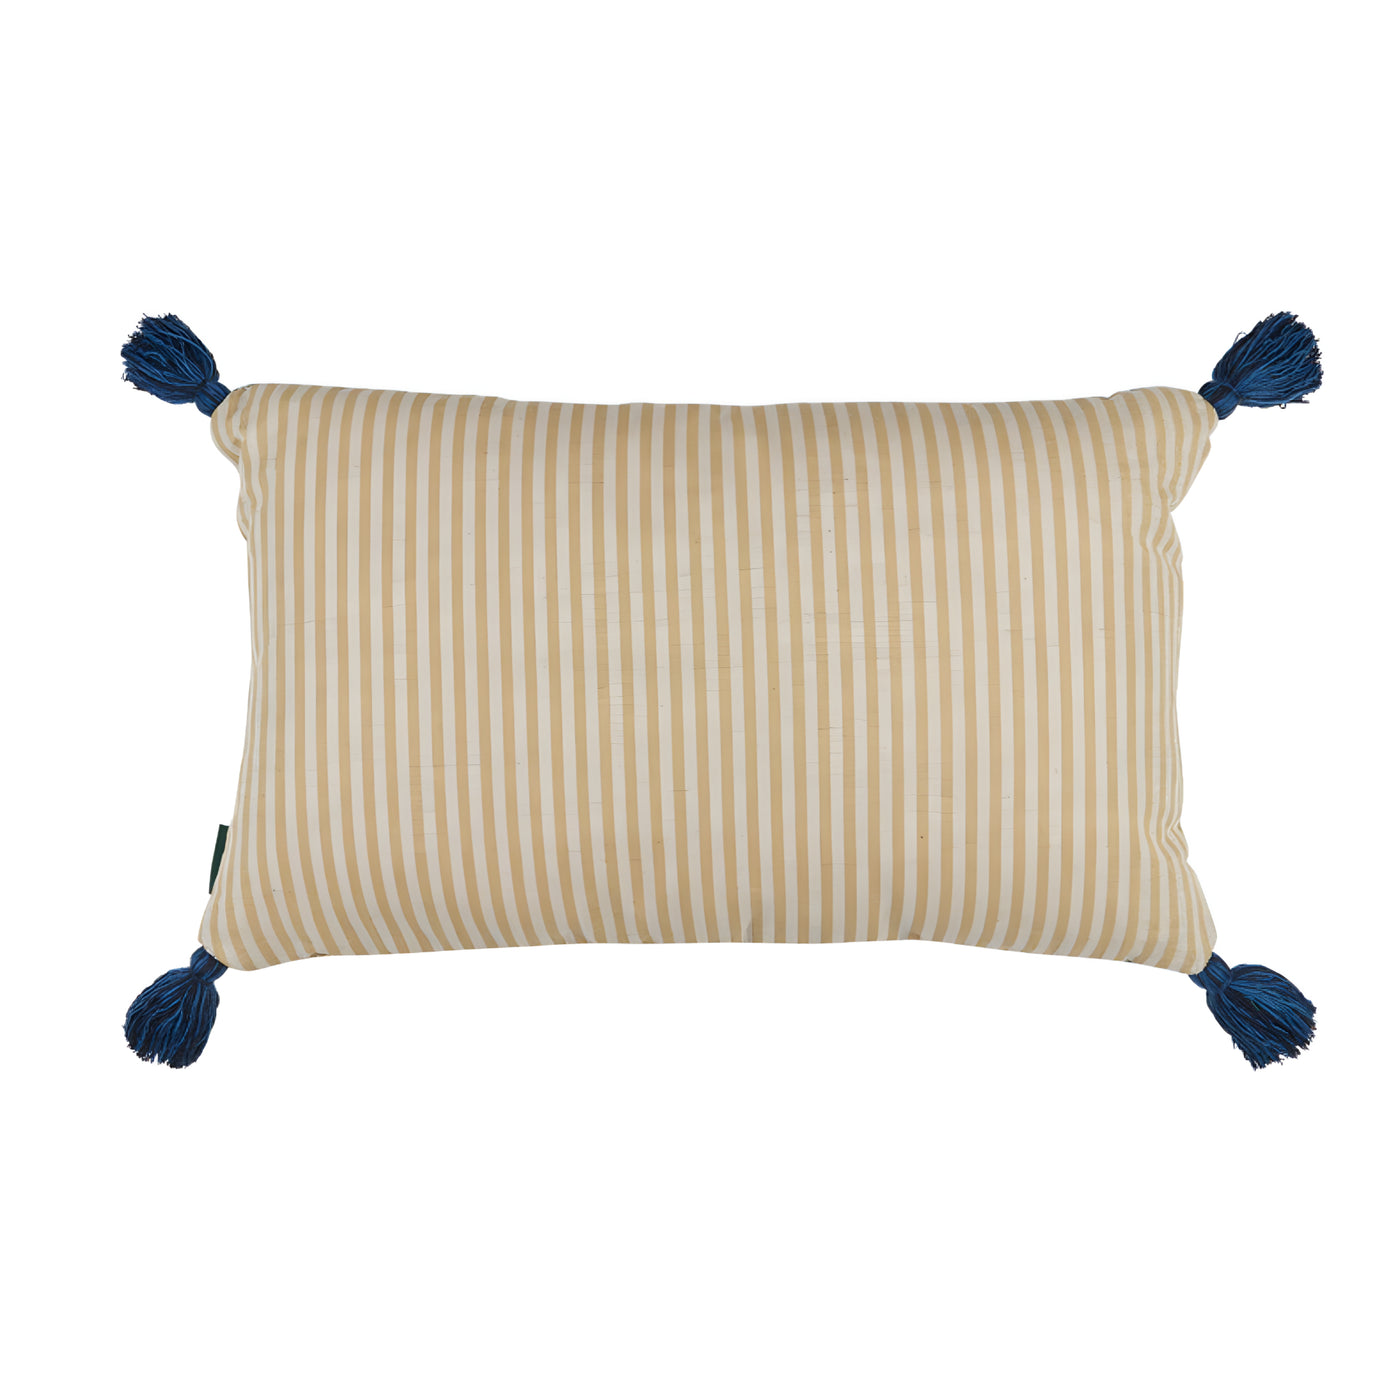 Penny Morrison pillow with blue tassels